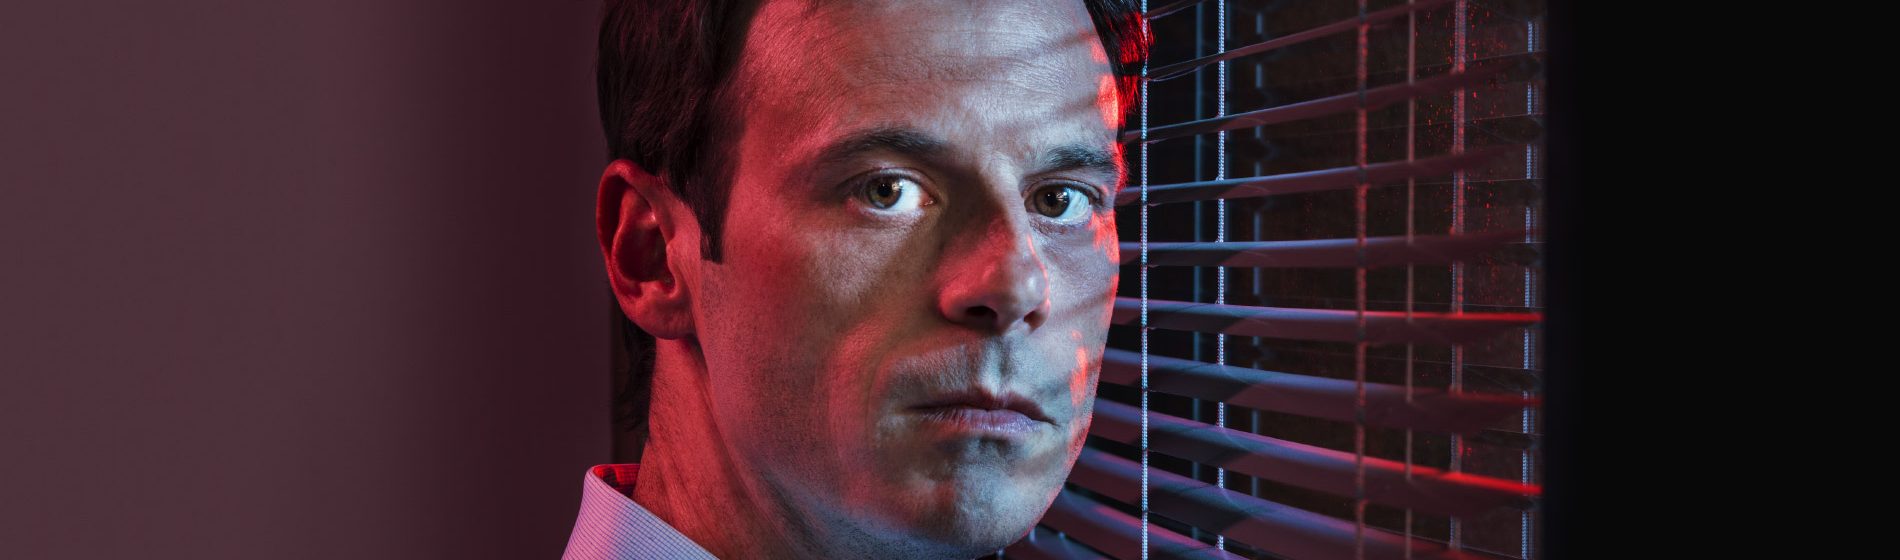 Halt and Catch Fire Season 4 - Scoot McNairy